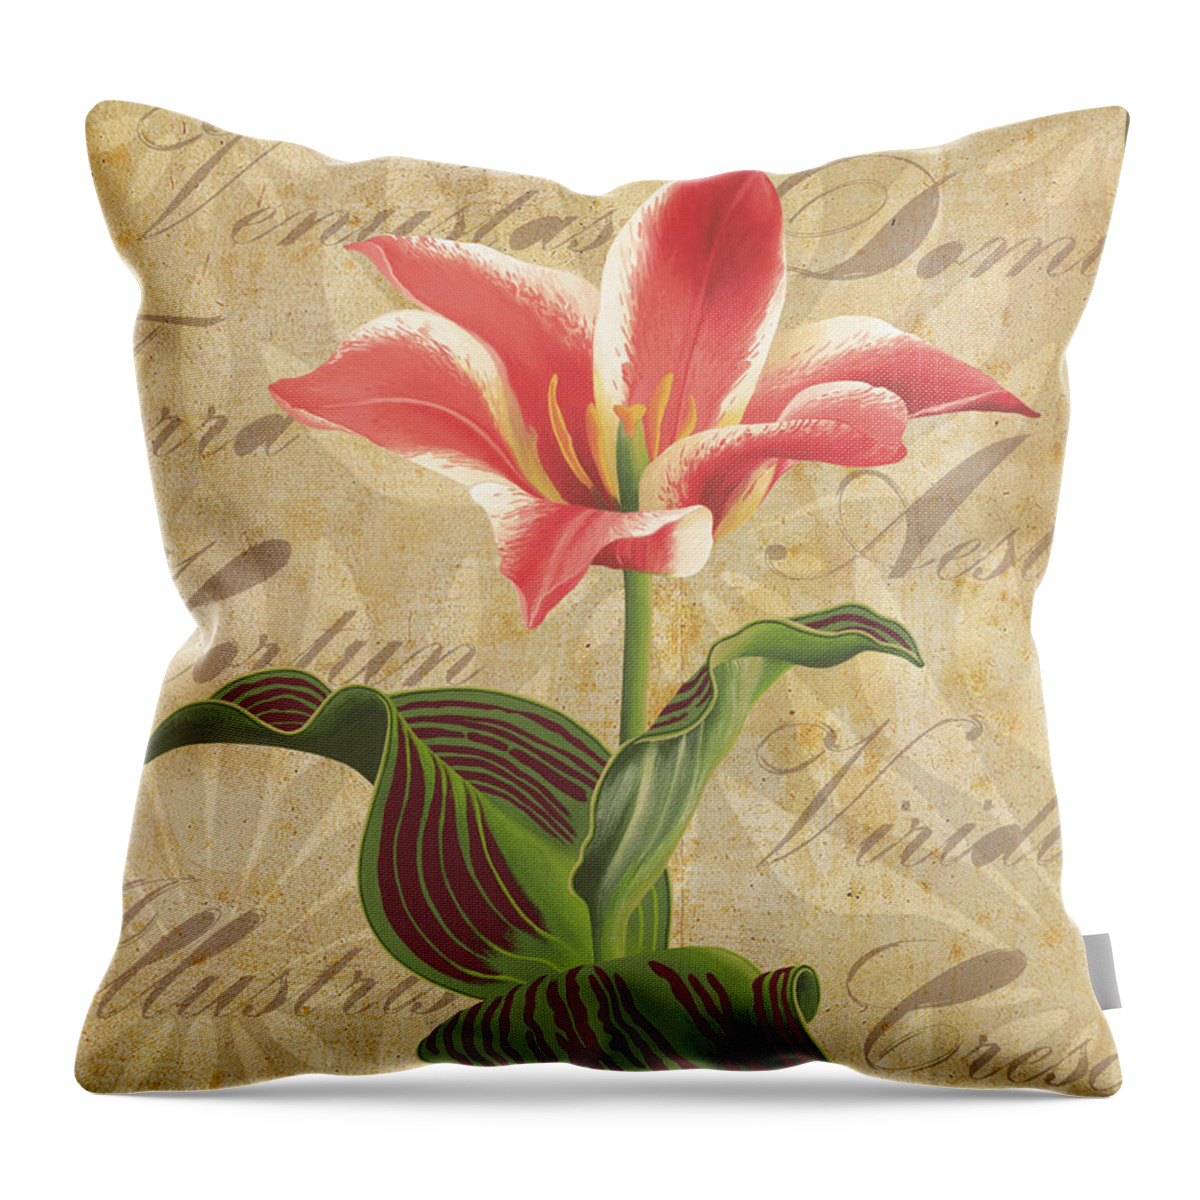 Tulip Throw Pillow featuring the painting Tulipa Kaufmanniana Summer by Nikita Coulombe